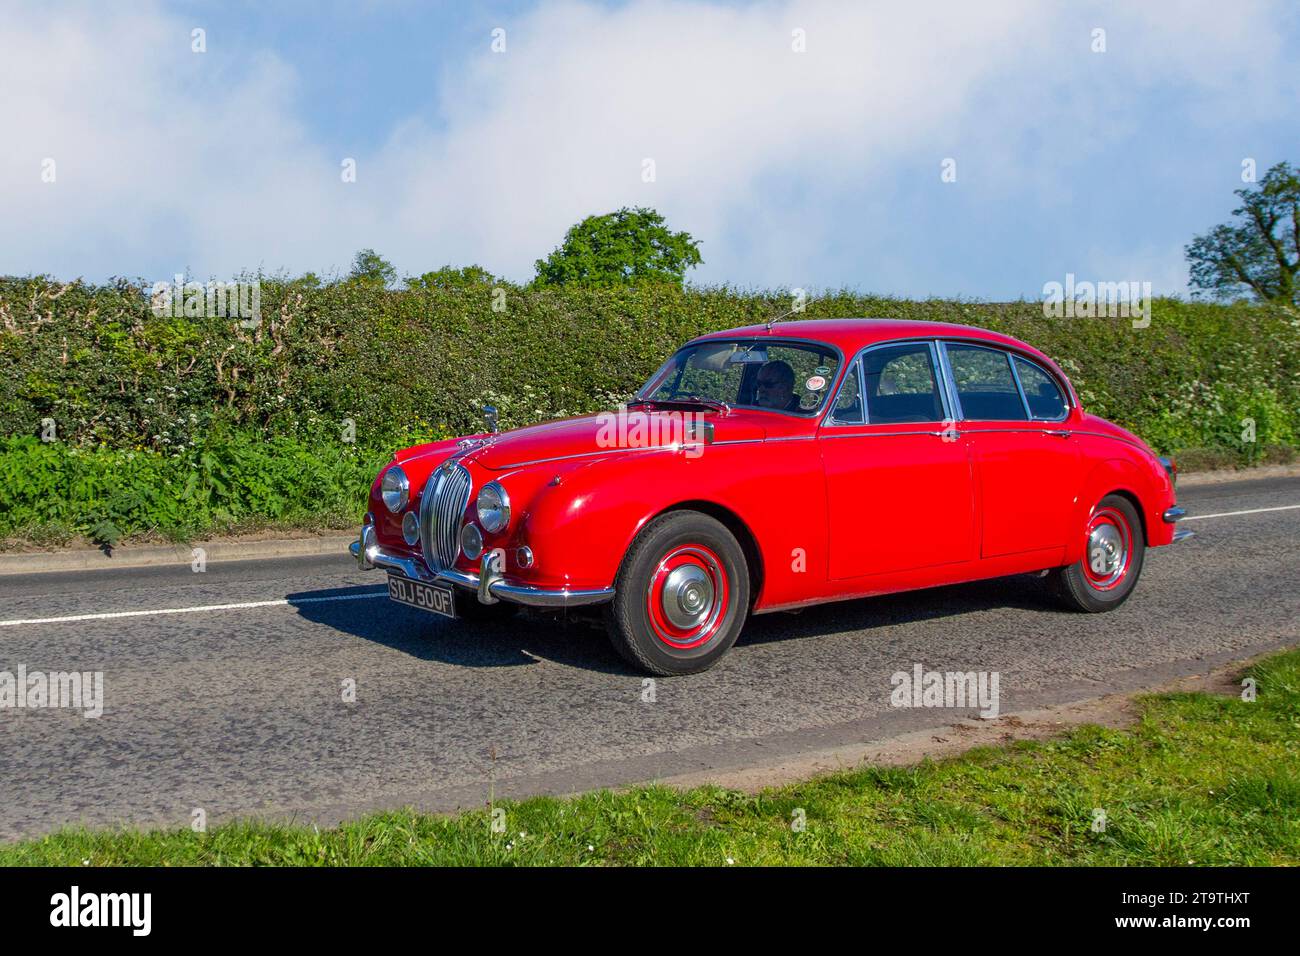 1968 60s sixties Red British Jaguar Mark 2 240 , luxury executive car, Petrol 2483 cc, 2.5 l, Cylinders 6 Cyl;  sports and performance car enthusiasts travelling in Cheshire, UK Stock Photo